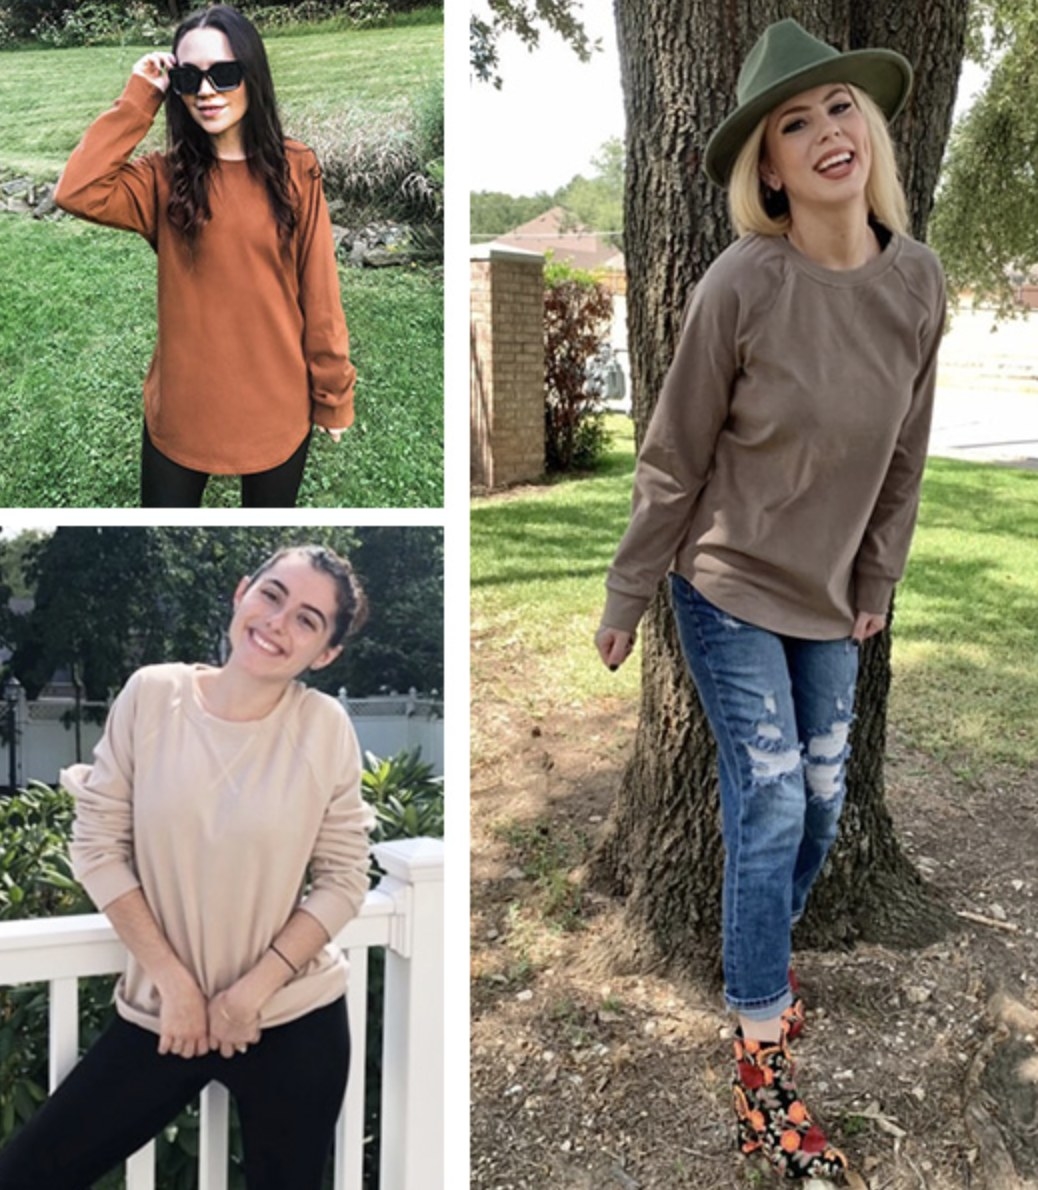 Three different models wearing the sweater in orange, cream, and grey (respectively)